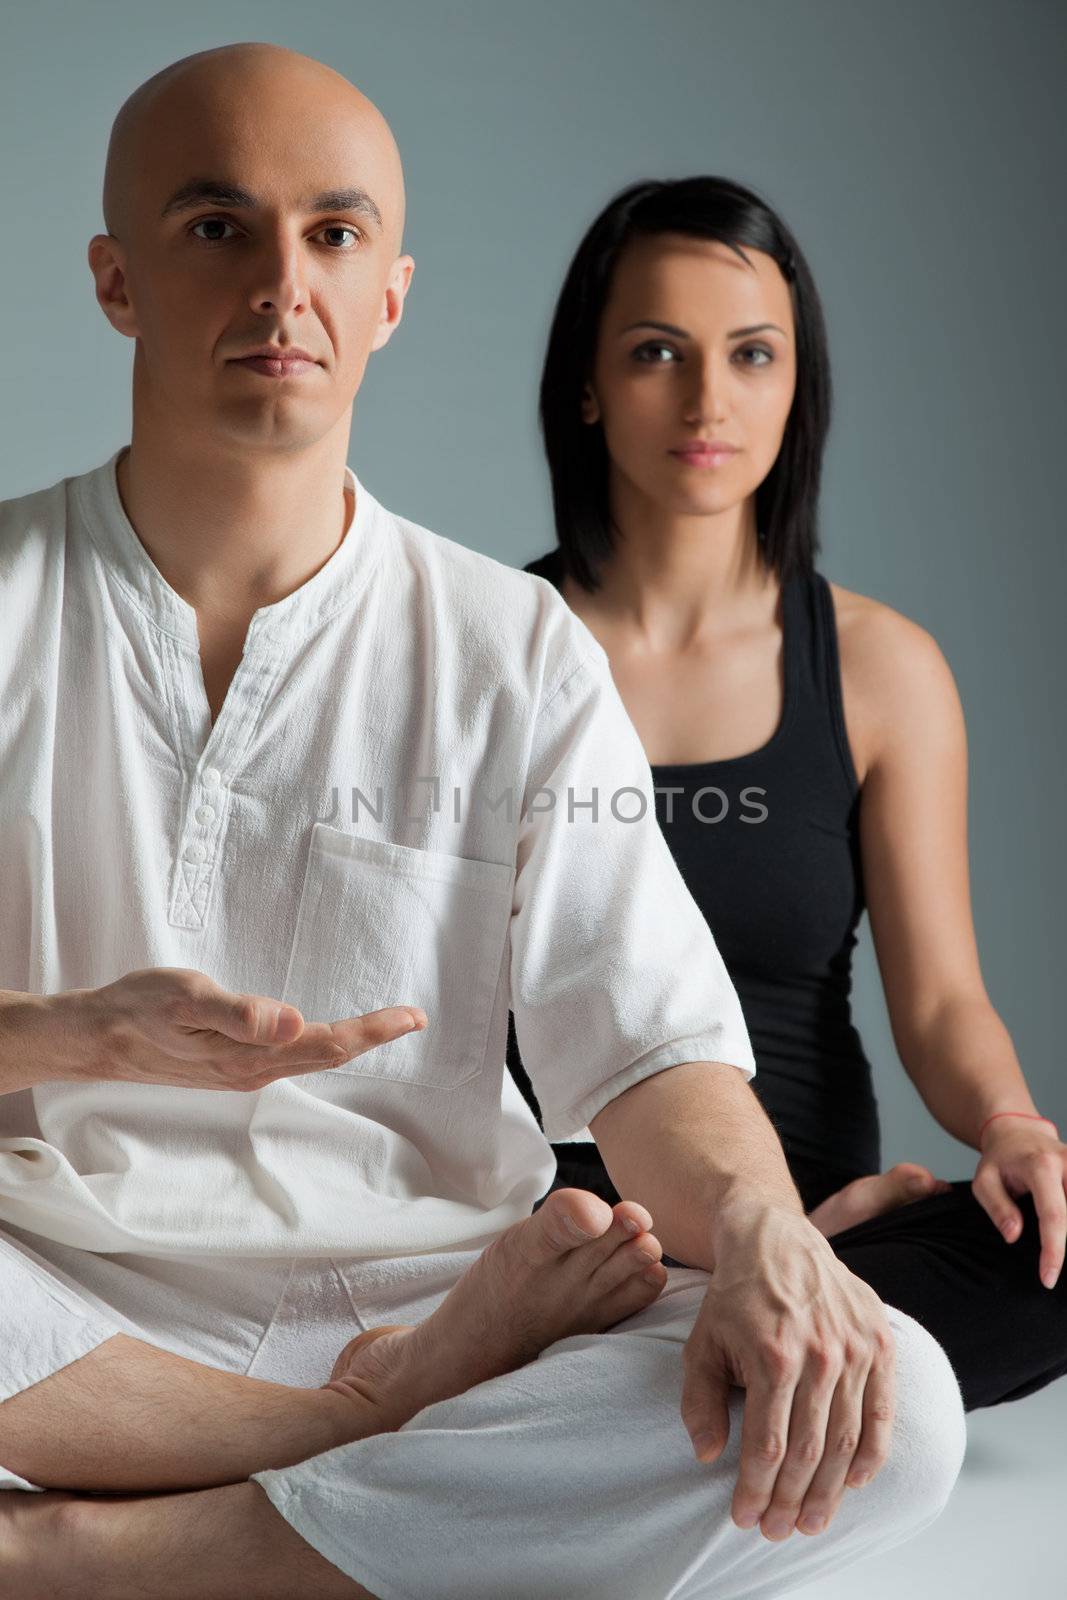 Man in white and woman in black doing yoga exercise, meditation